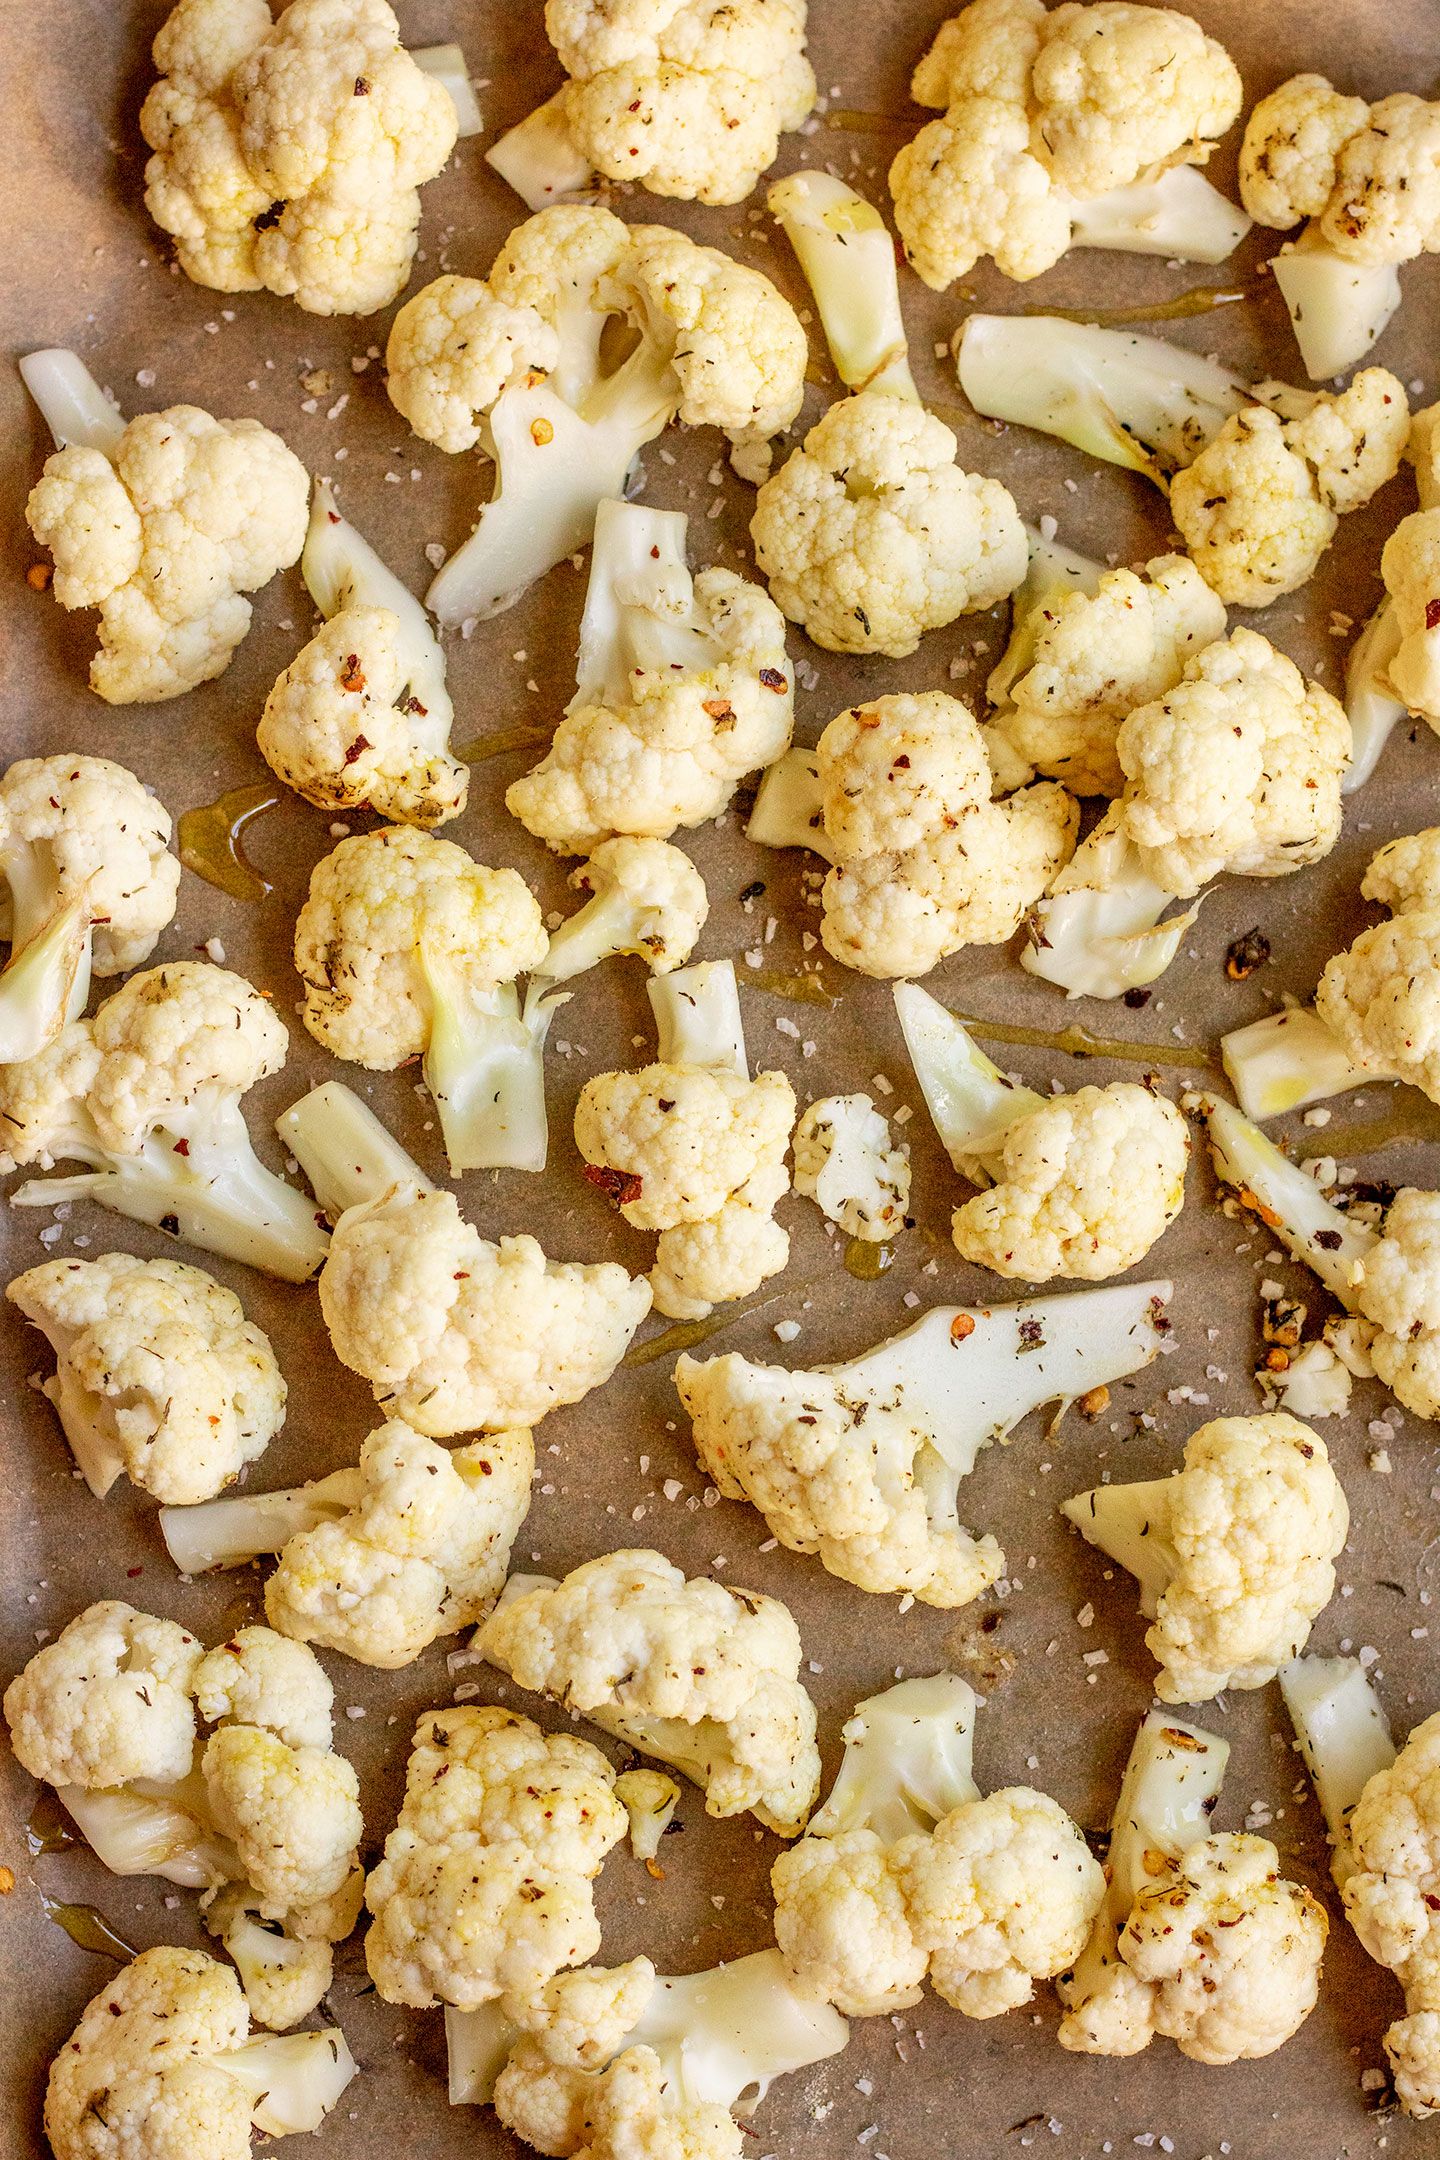 Cauliflower coated with oil and seasonings on a parchment lined baking tray.